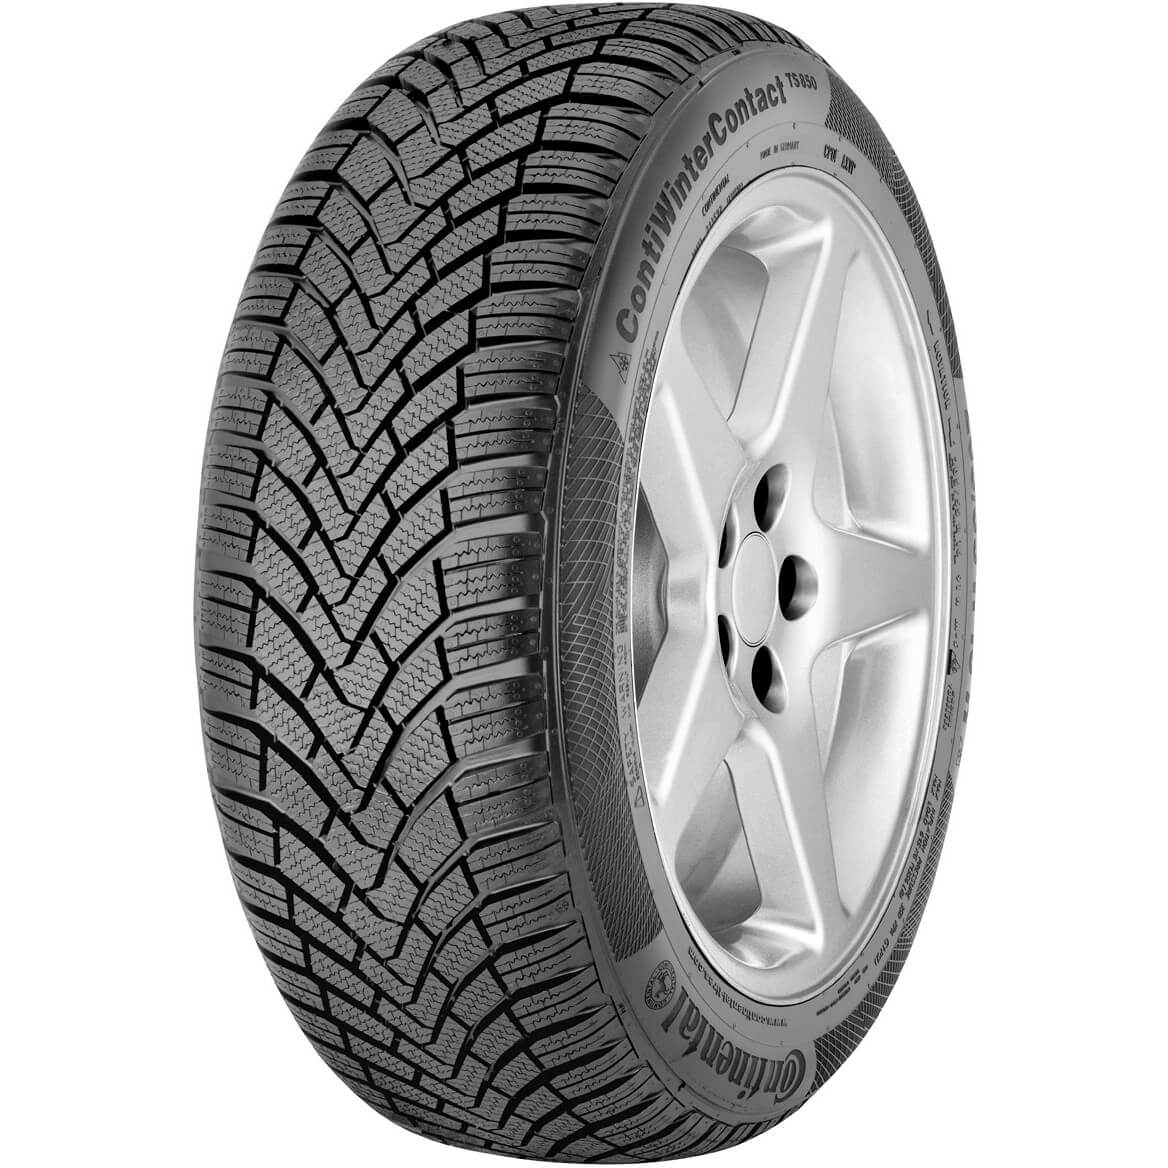  Anvelope Iarna Continental ContiWinterContact TS850, 175/70R14 84T 